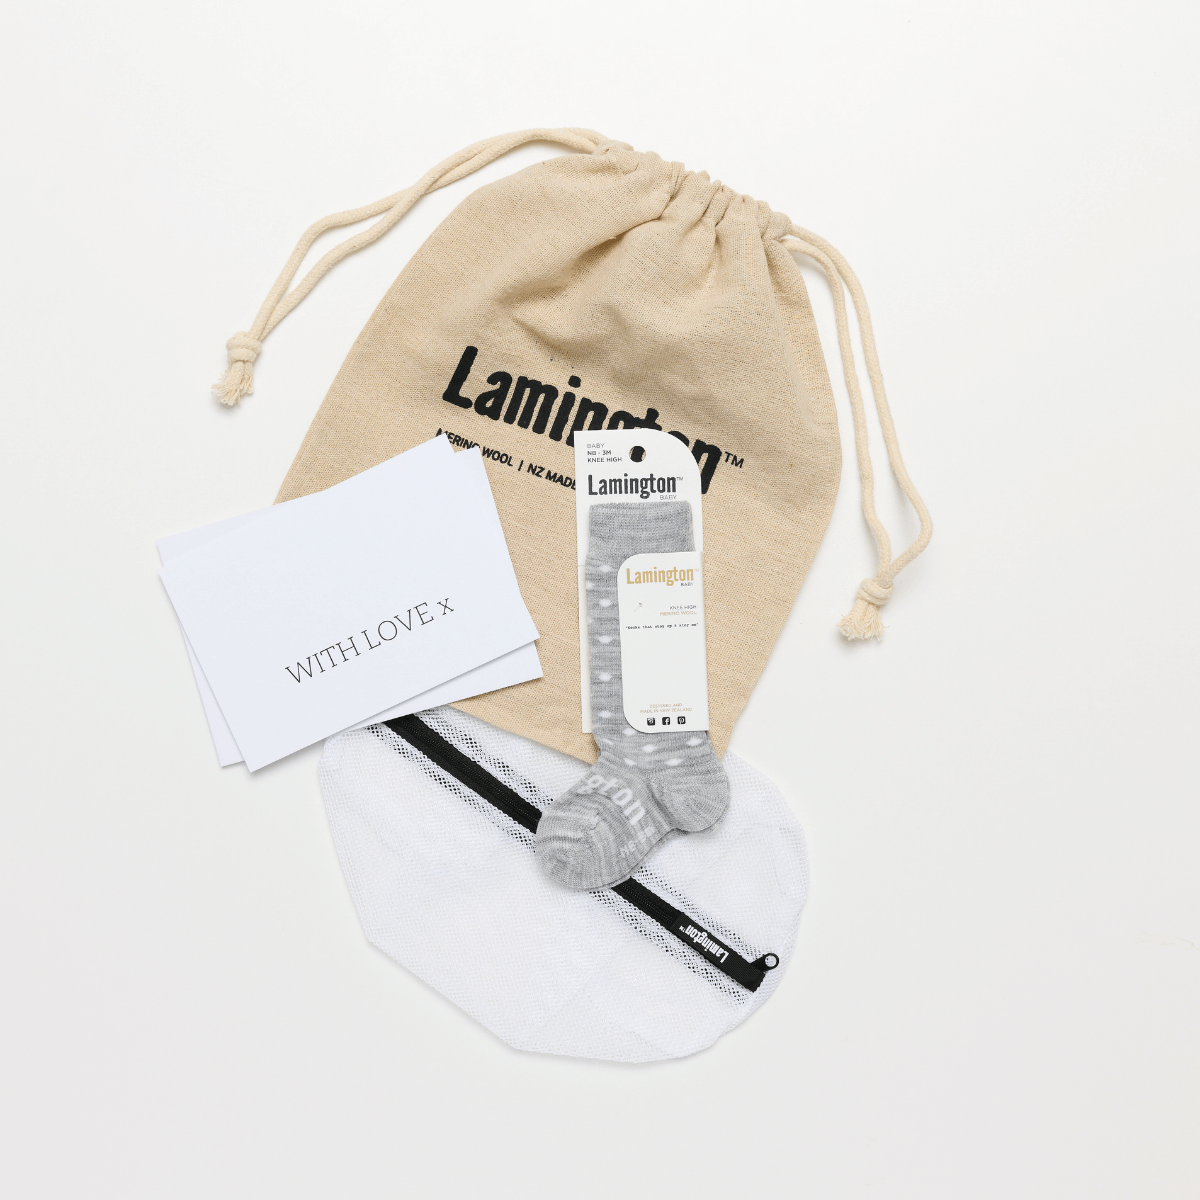 packaged gift set baby with merino socks, gift card, lamington branded laundry bag and card